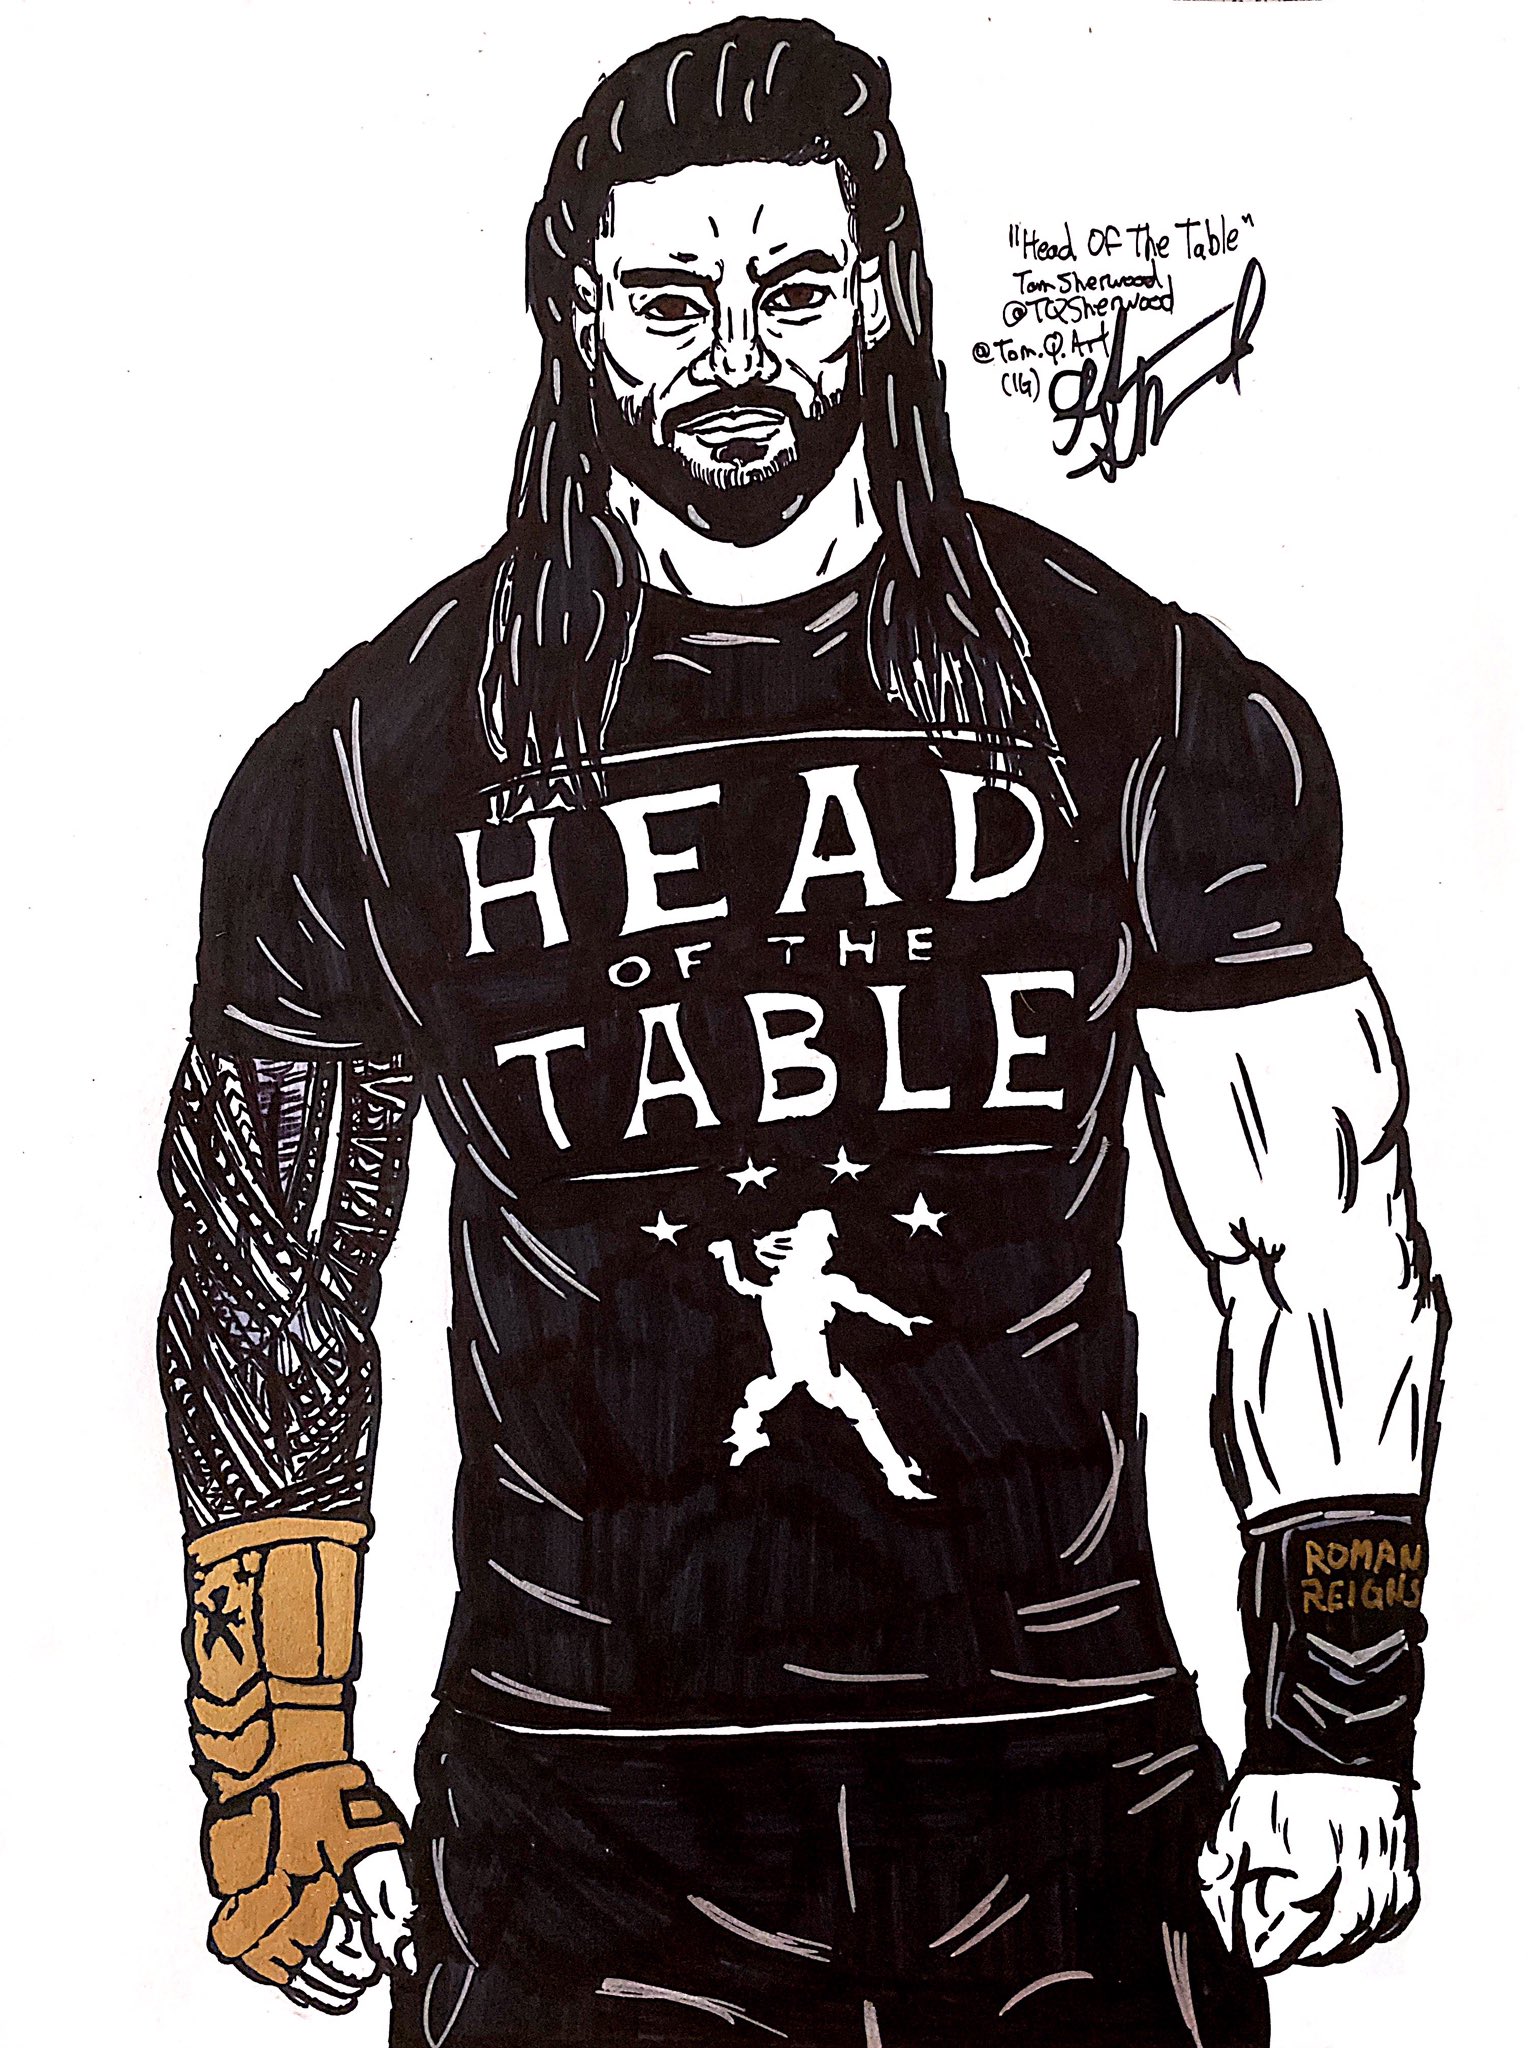 Cormac Sketches on Twitter I personally think this is my best drawing  yet Roman Reigns wwe romanreigns WWEonFOX wwe RomanReigns  httpstcovE7AzsBkPz  X